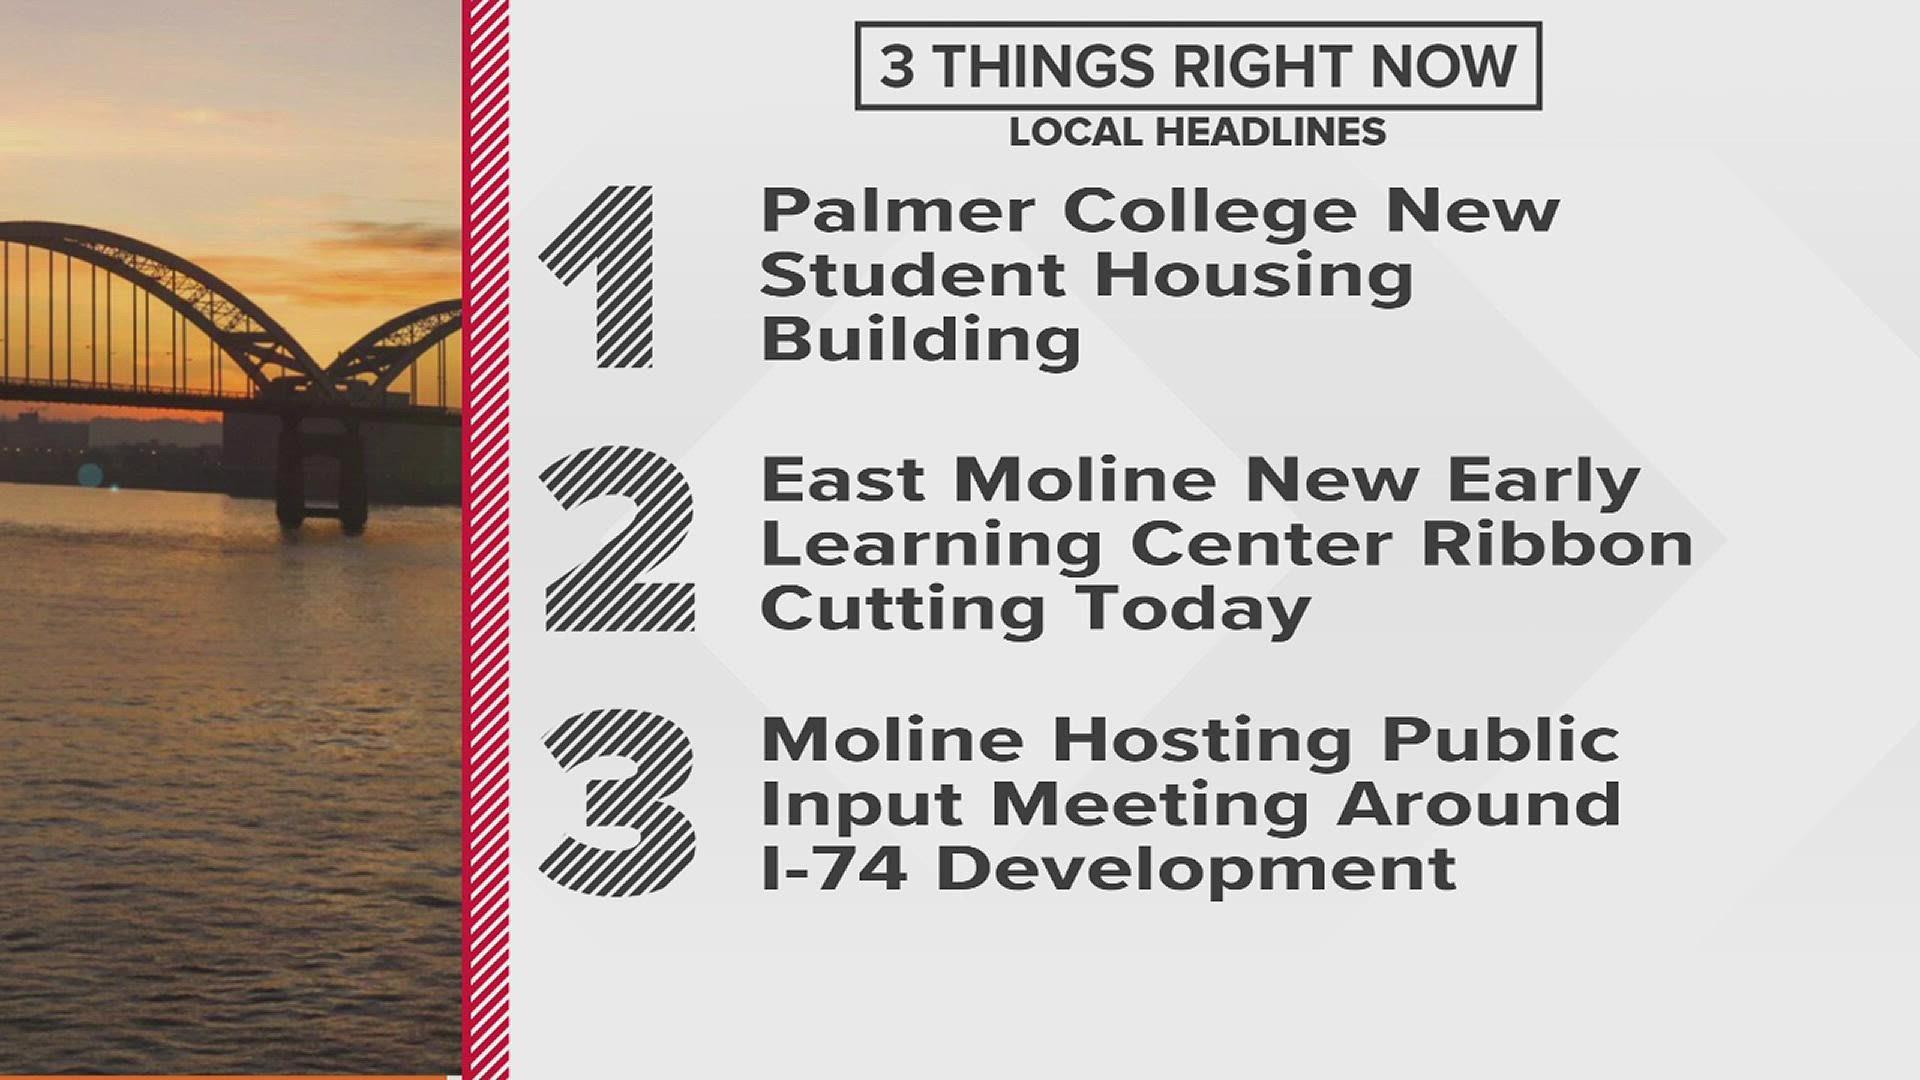 Davenport's Palmer College opens a new student housing building, East Moline opens new early learning center and Moline will host public input meeting on I-74 bridge